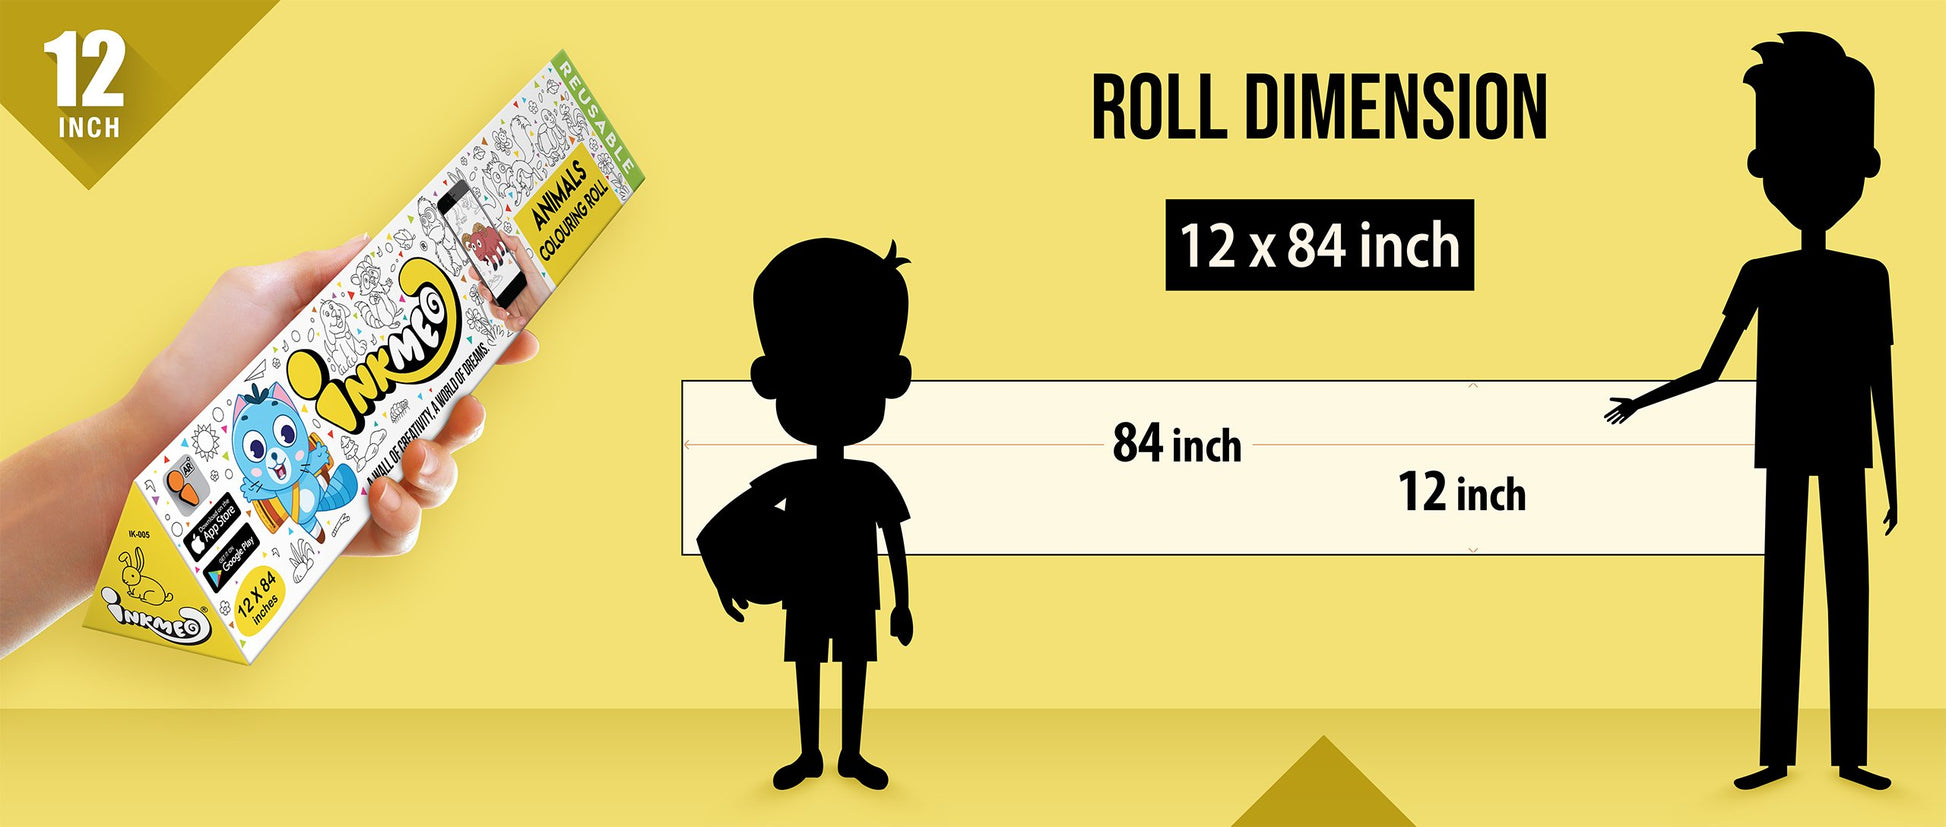 The image shows a yellow background with a ruler indicating child and adult height on an 12*84 inch paper roll dimension.